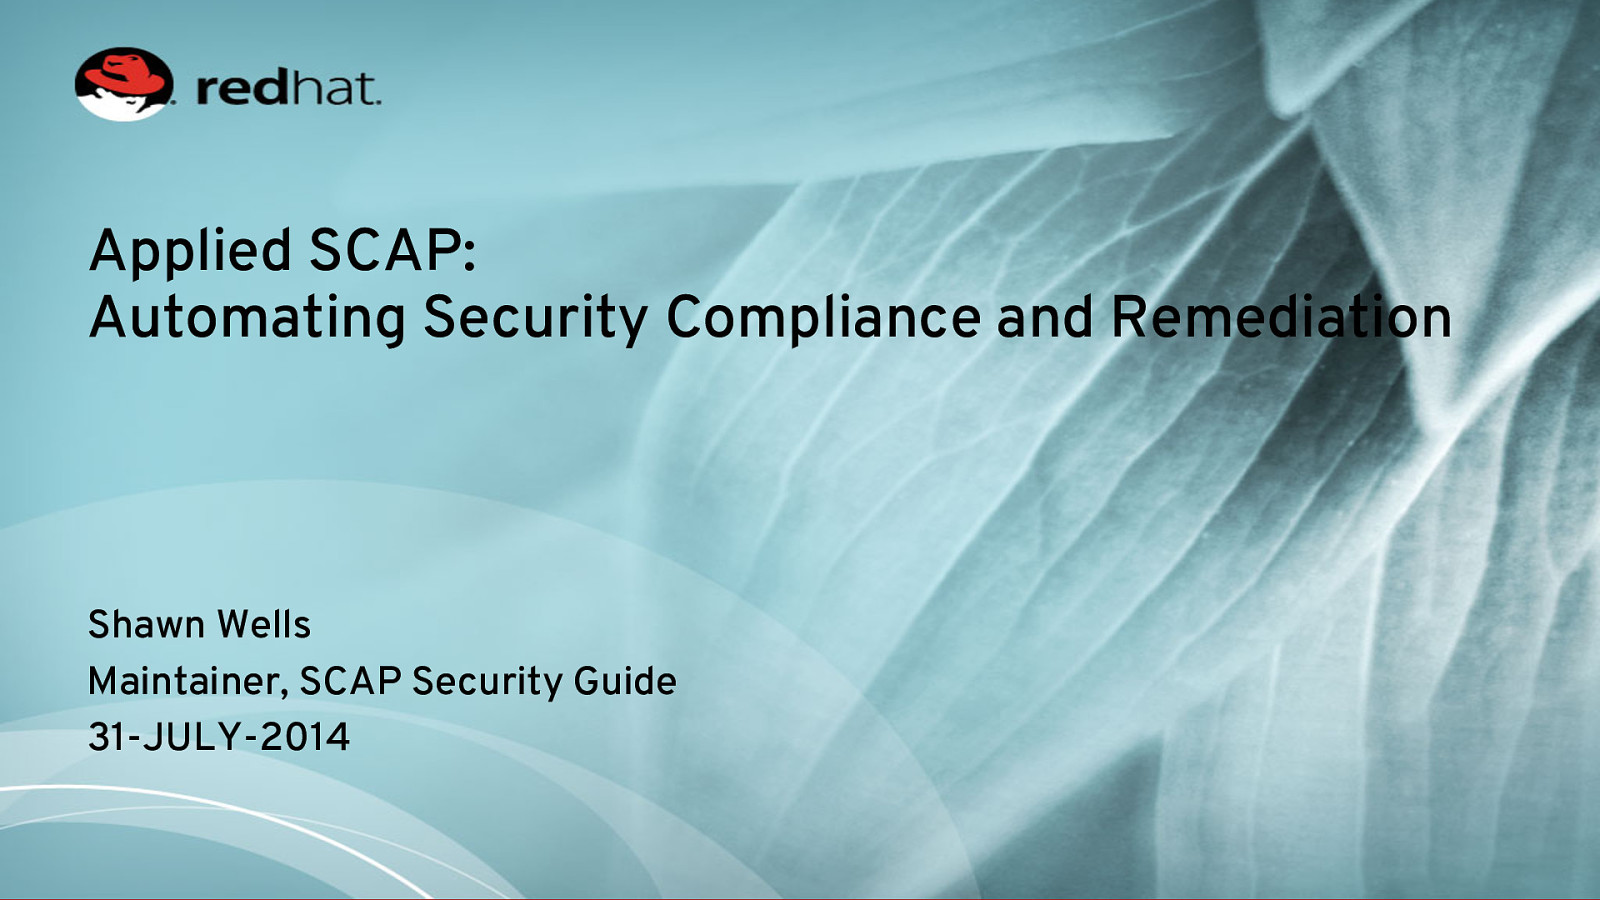 Applied SCAP: Automating Security Compliance